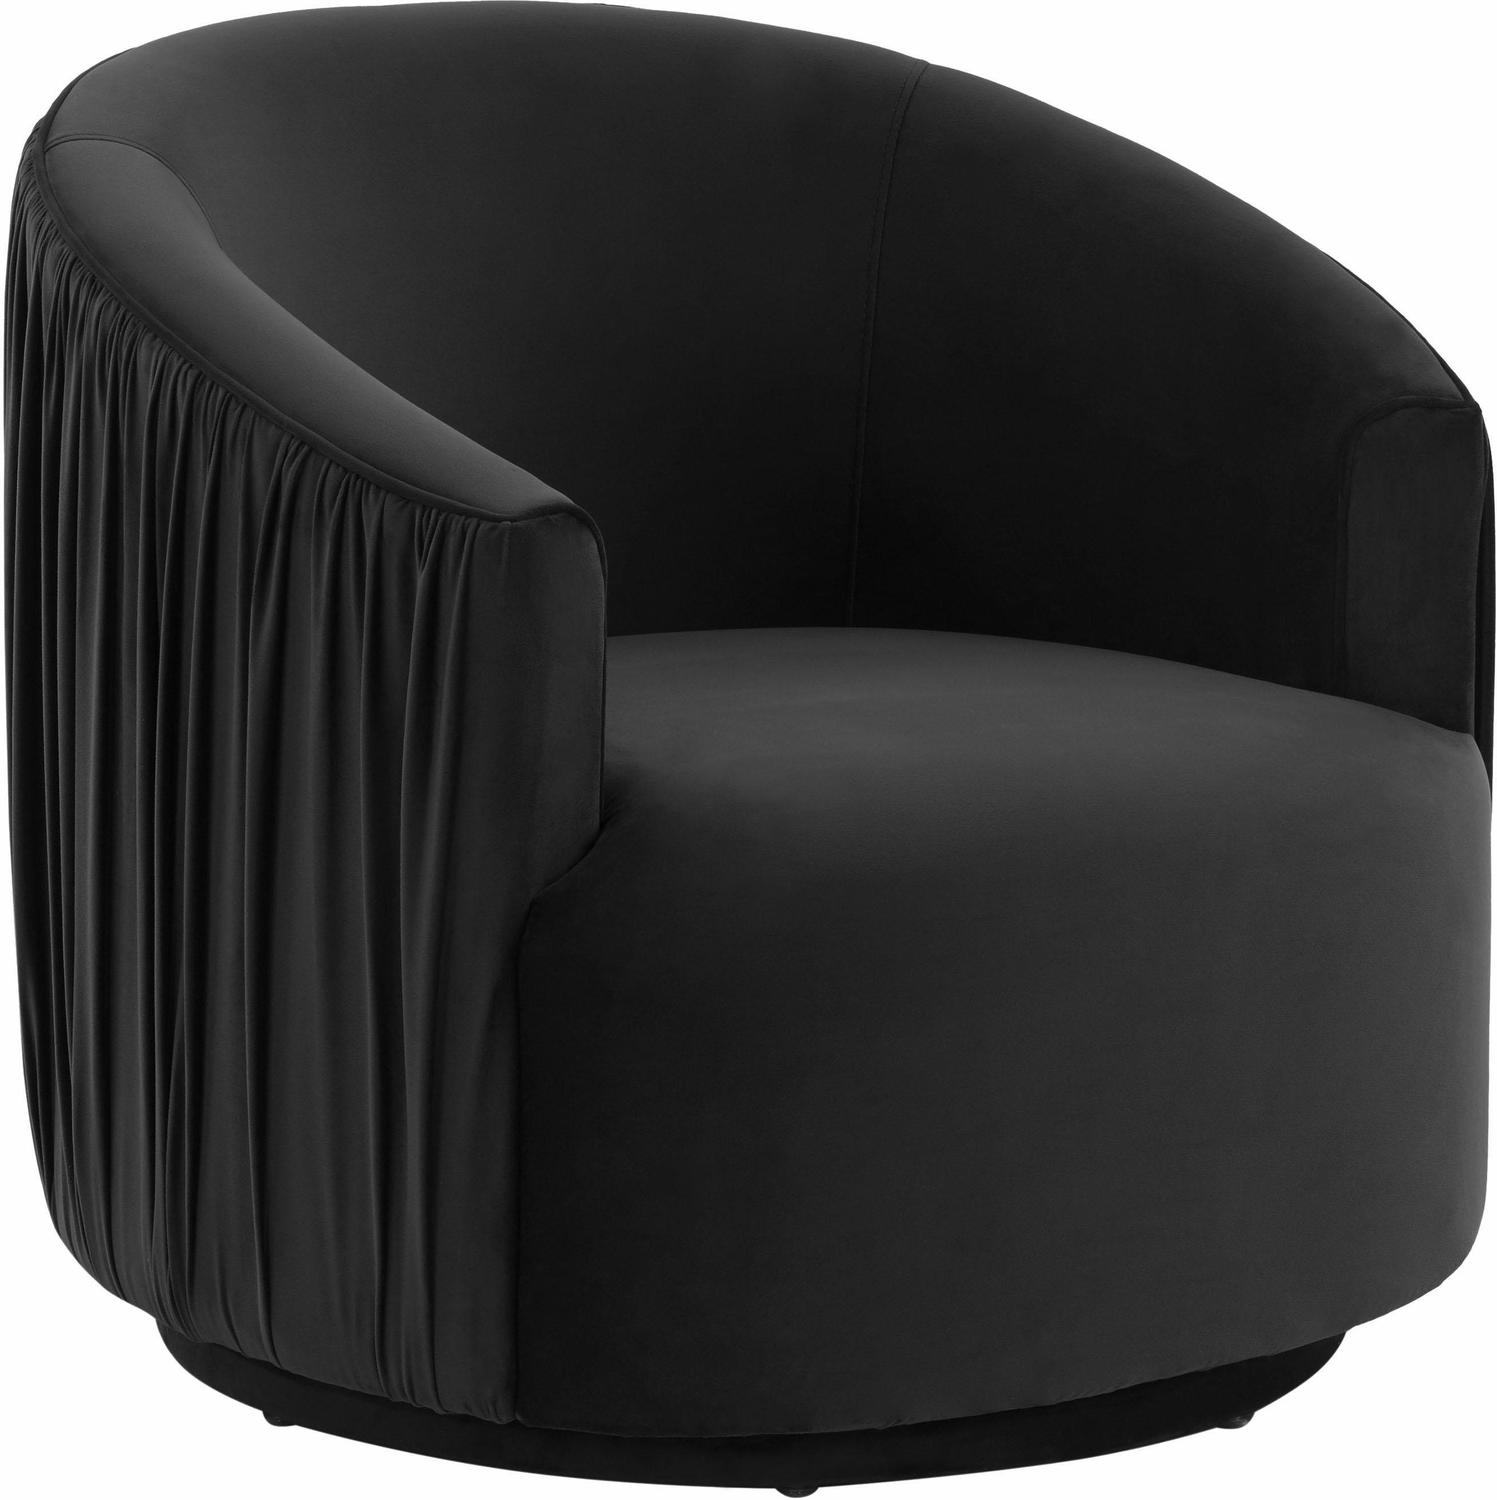 king chair throne Contemporary Design Furniture Accent Chairs Chairs Black